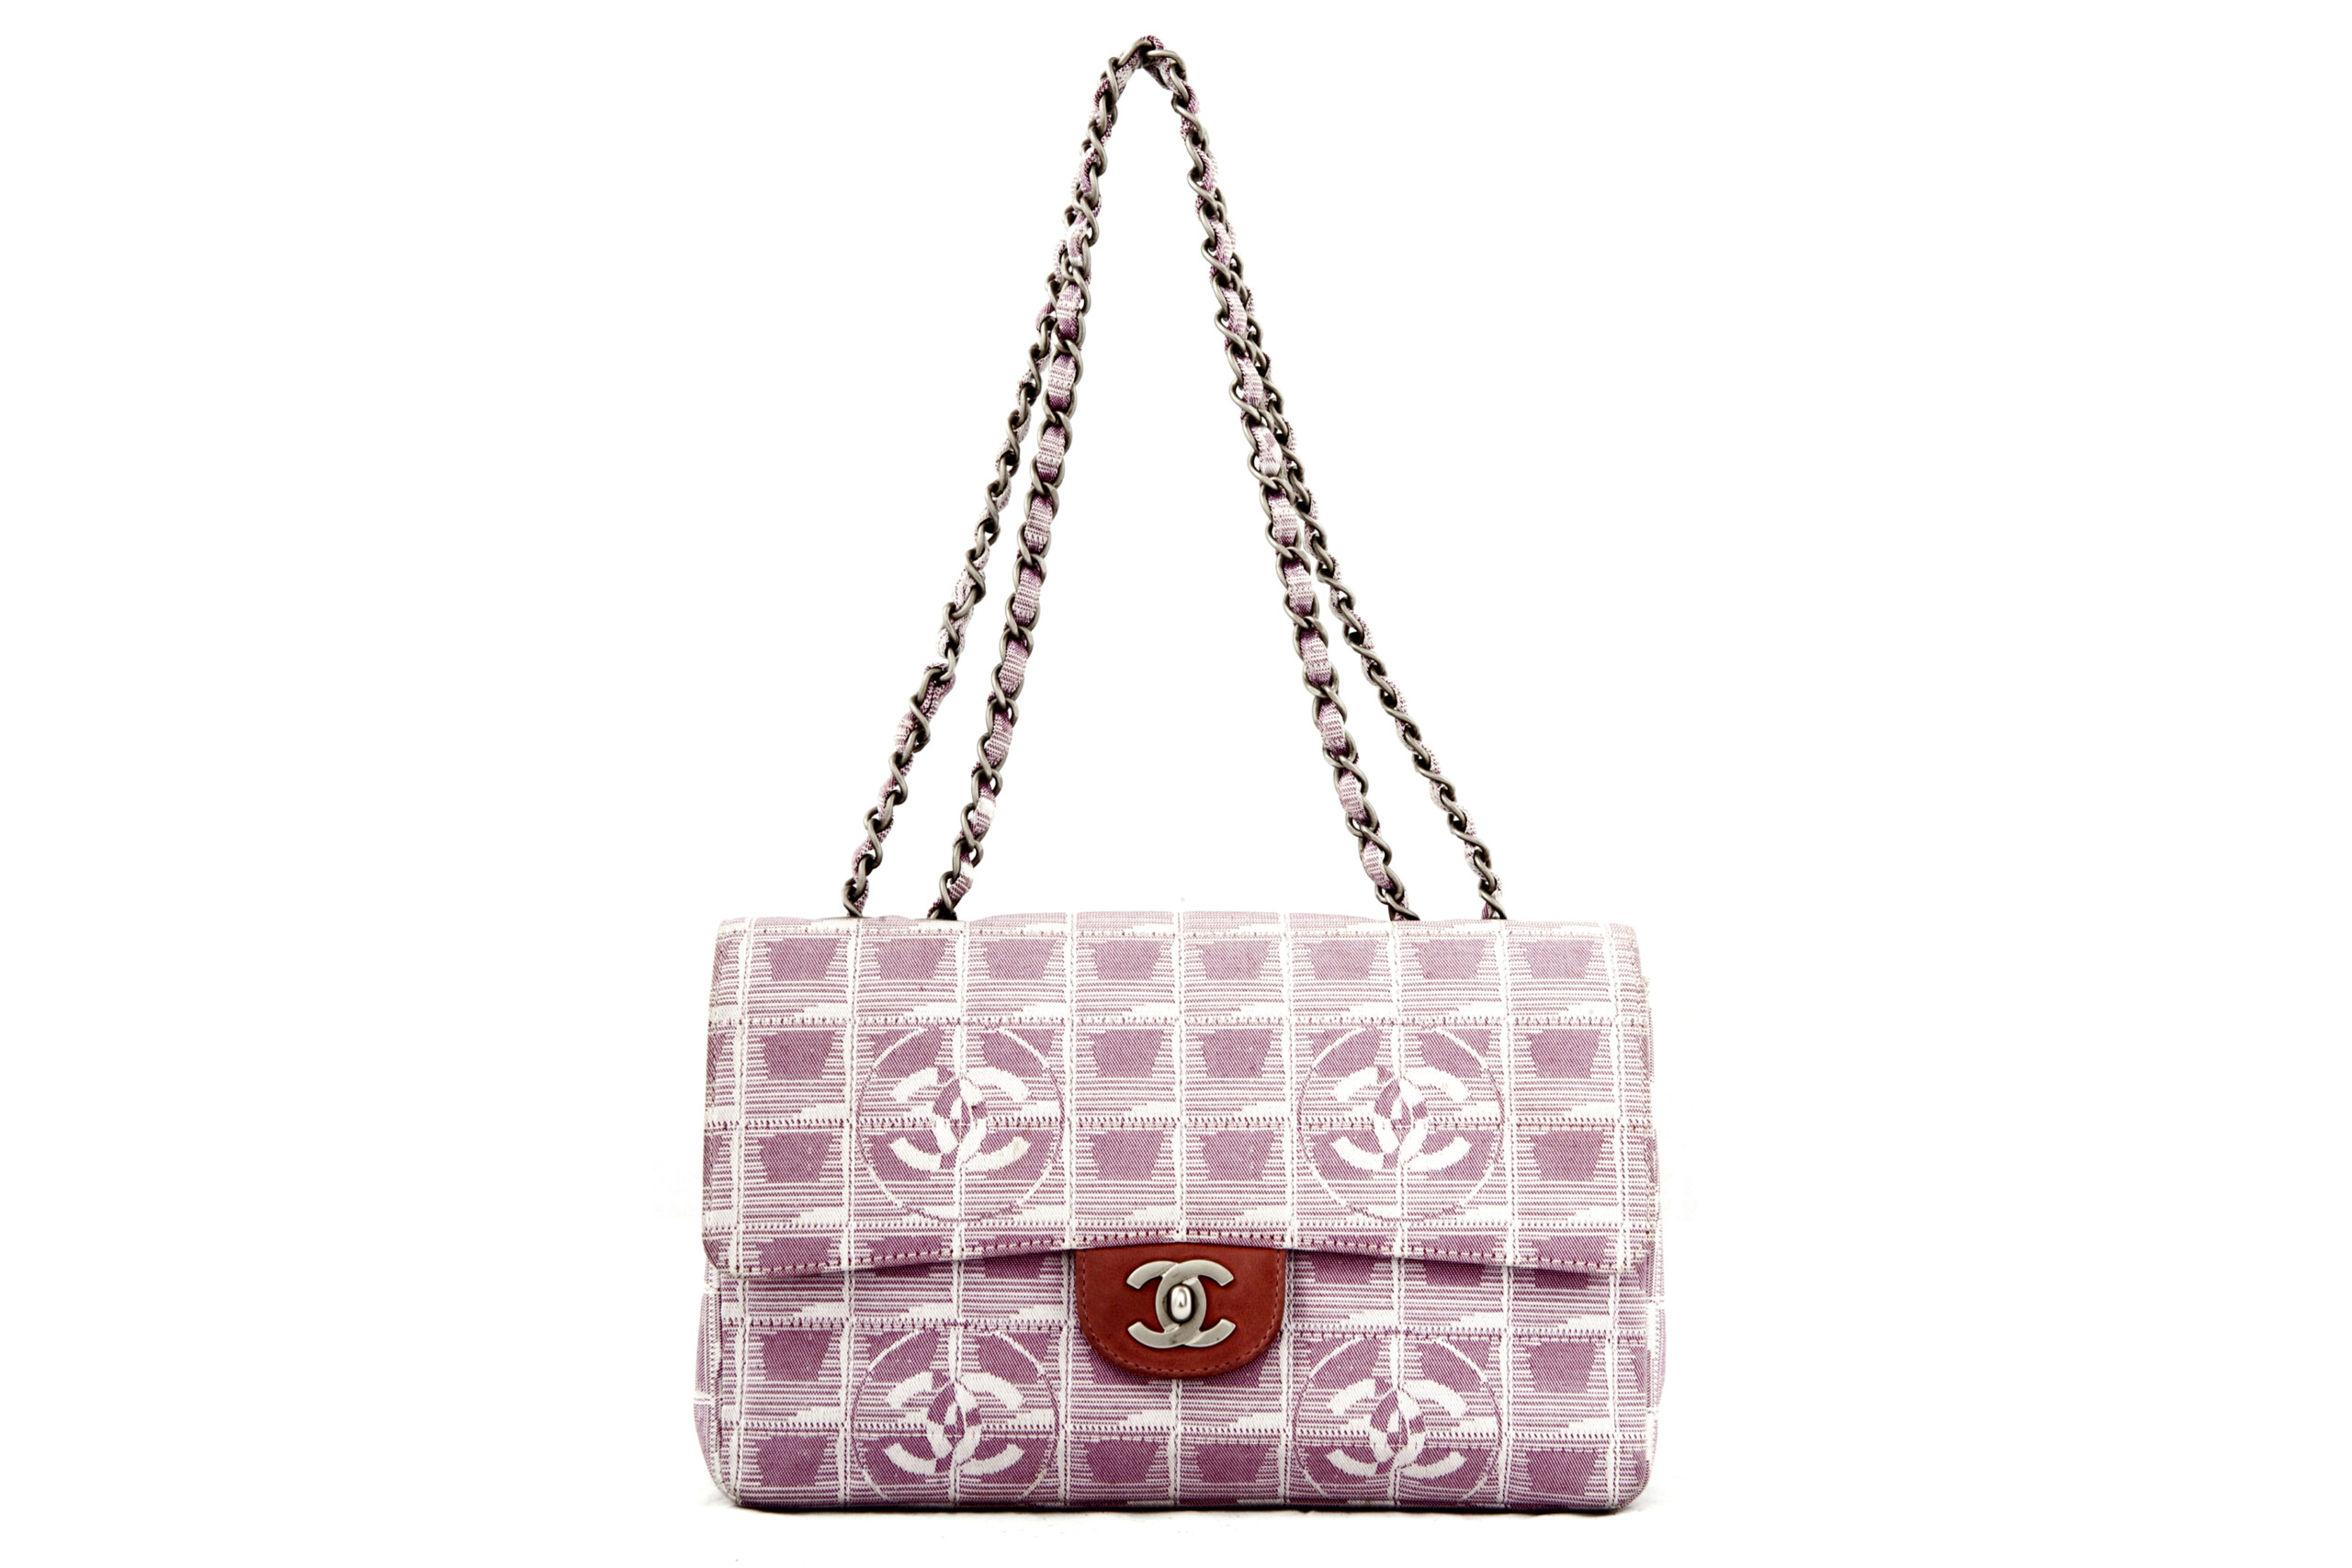 Chanel ”Timeless” pink and white fabric | Vintage Shop in Mykonos